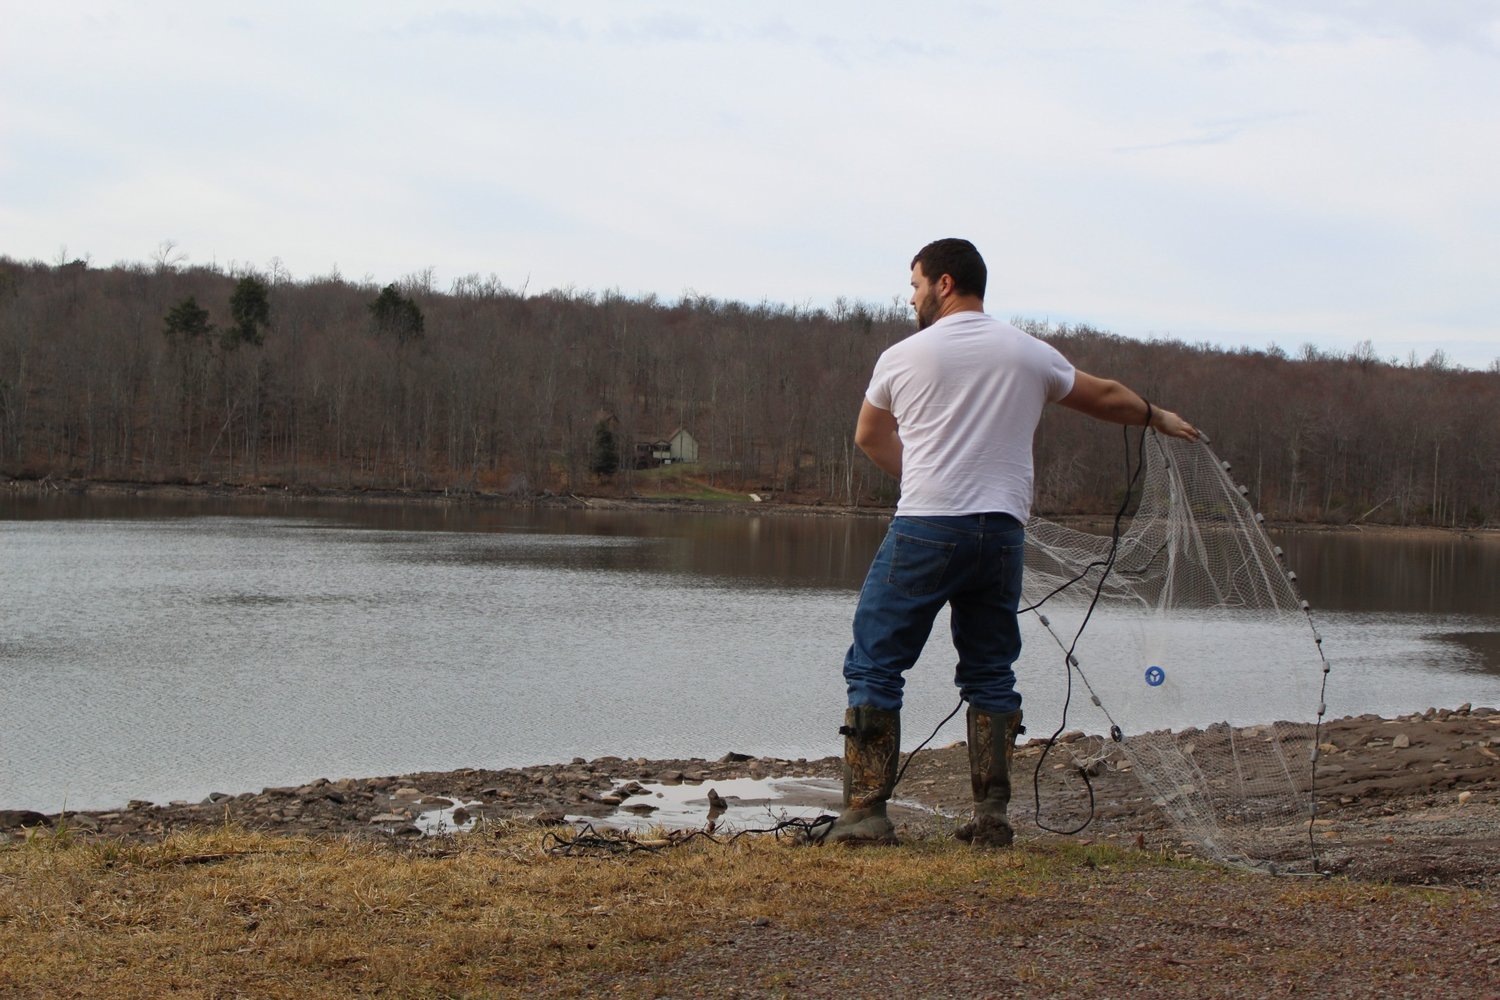 Throwing a cast net takes lots of practice, but before you approach the water, be sure to know the rules.